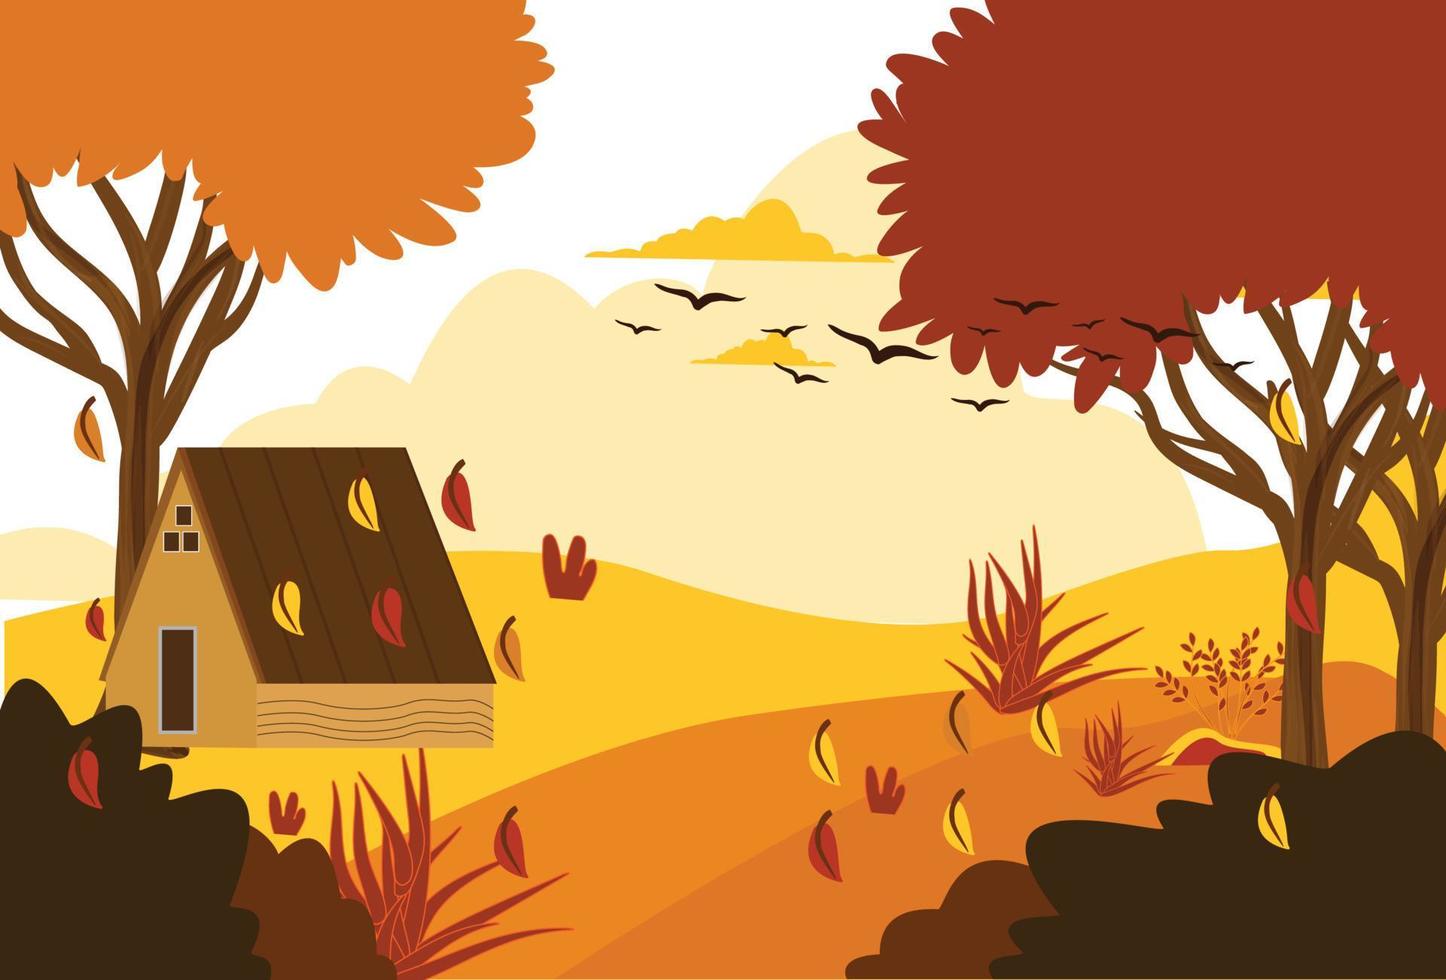 Autumn Season with tree and house Landscape Scenery Natural Background vector